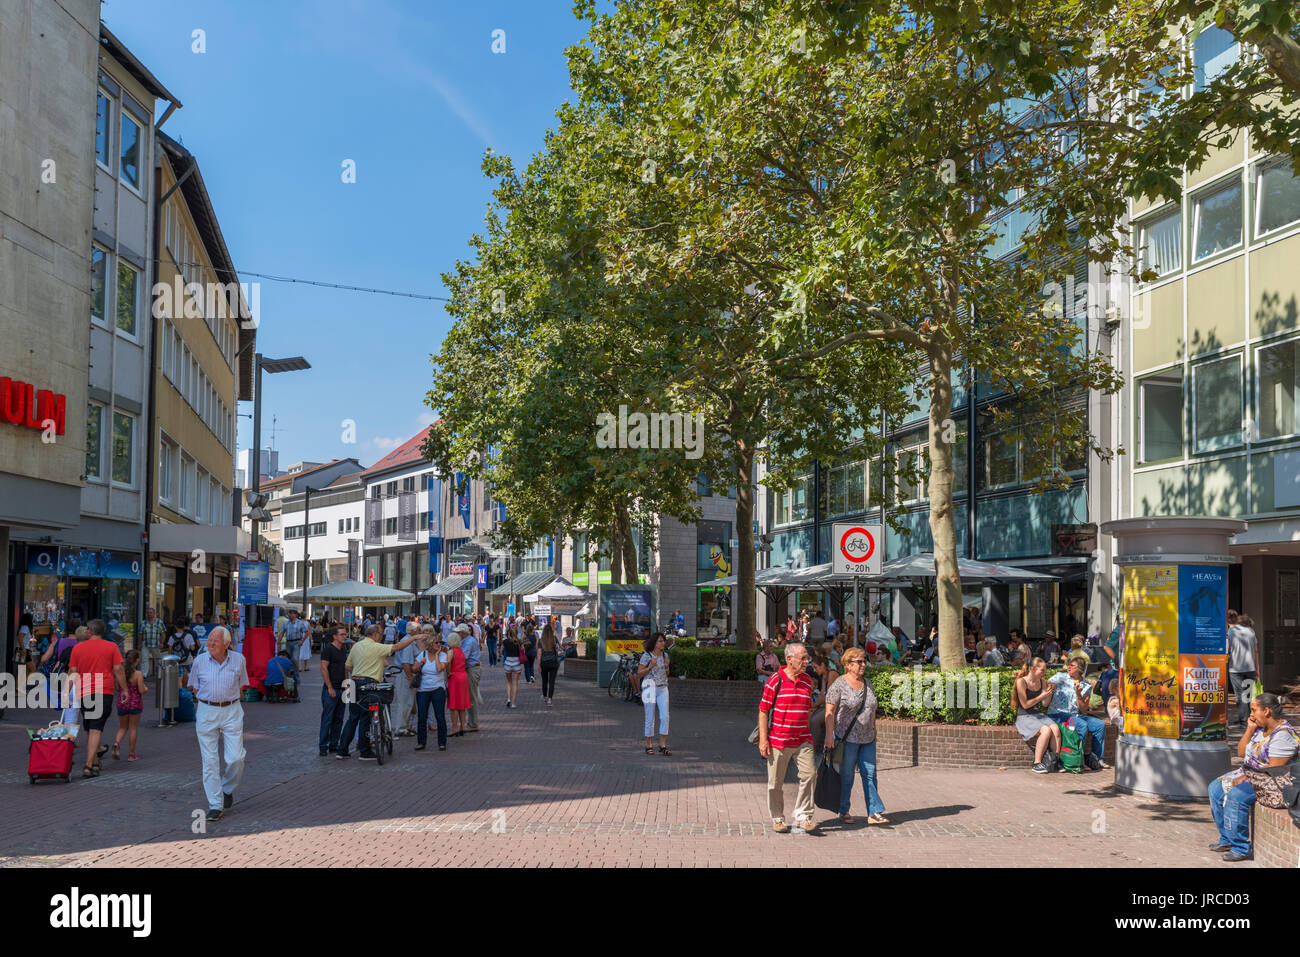 Shops in the city centre, Ulm, Baden-Württemberg, Germany Stock Photo